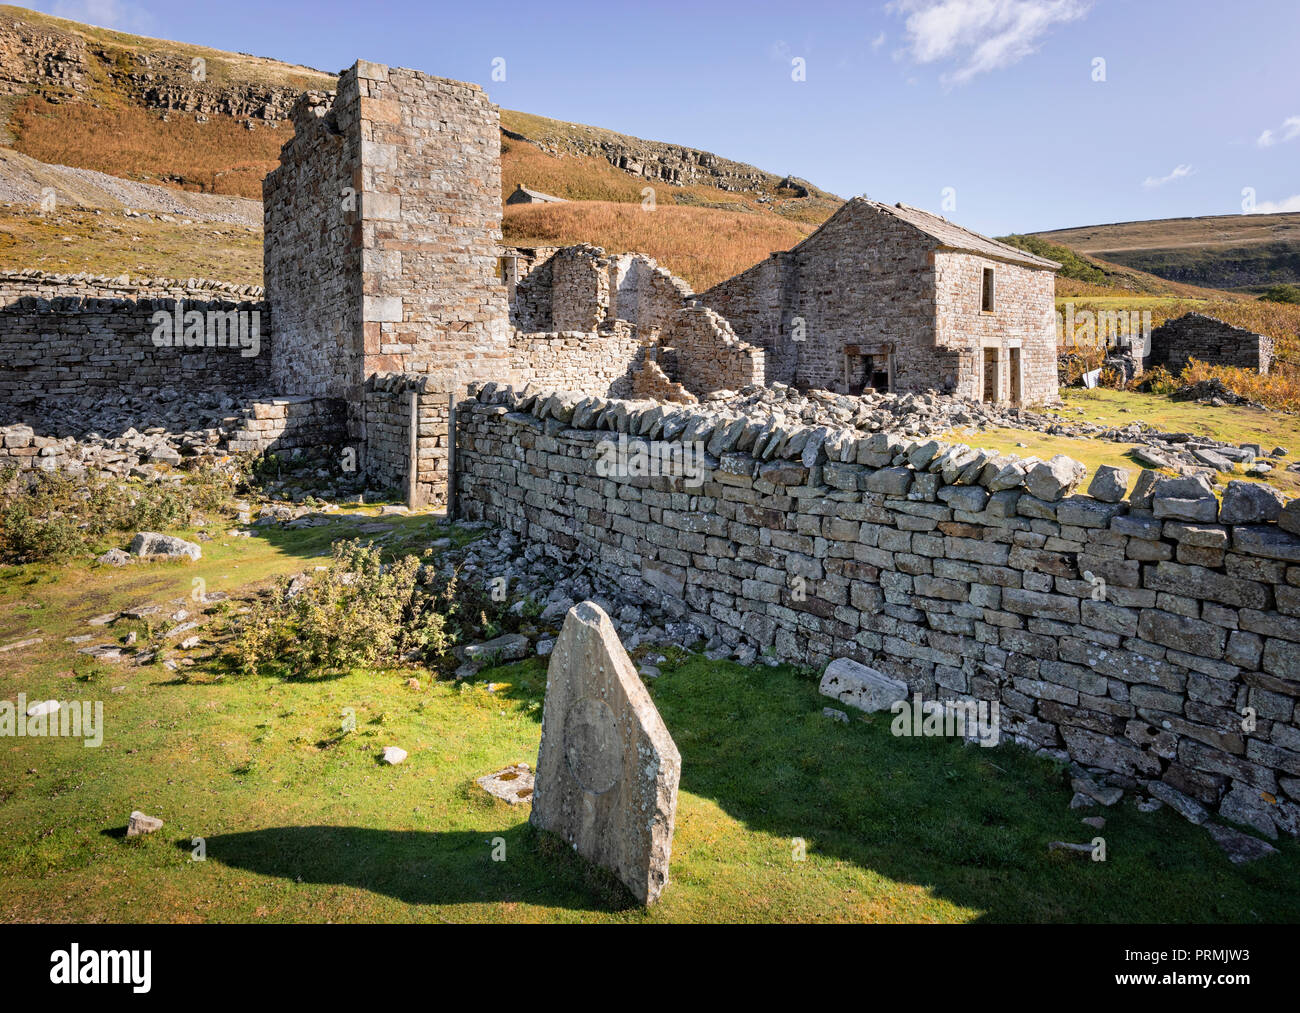 Crackpot Hall ruined stone building near Keld in Swaledale North Yorkshire. The ruin of a farmhouse was abandoned over fifty years ago. Stock Photo